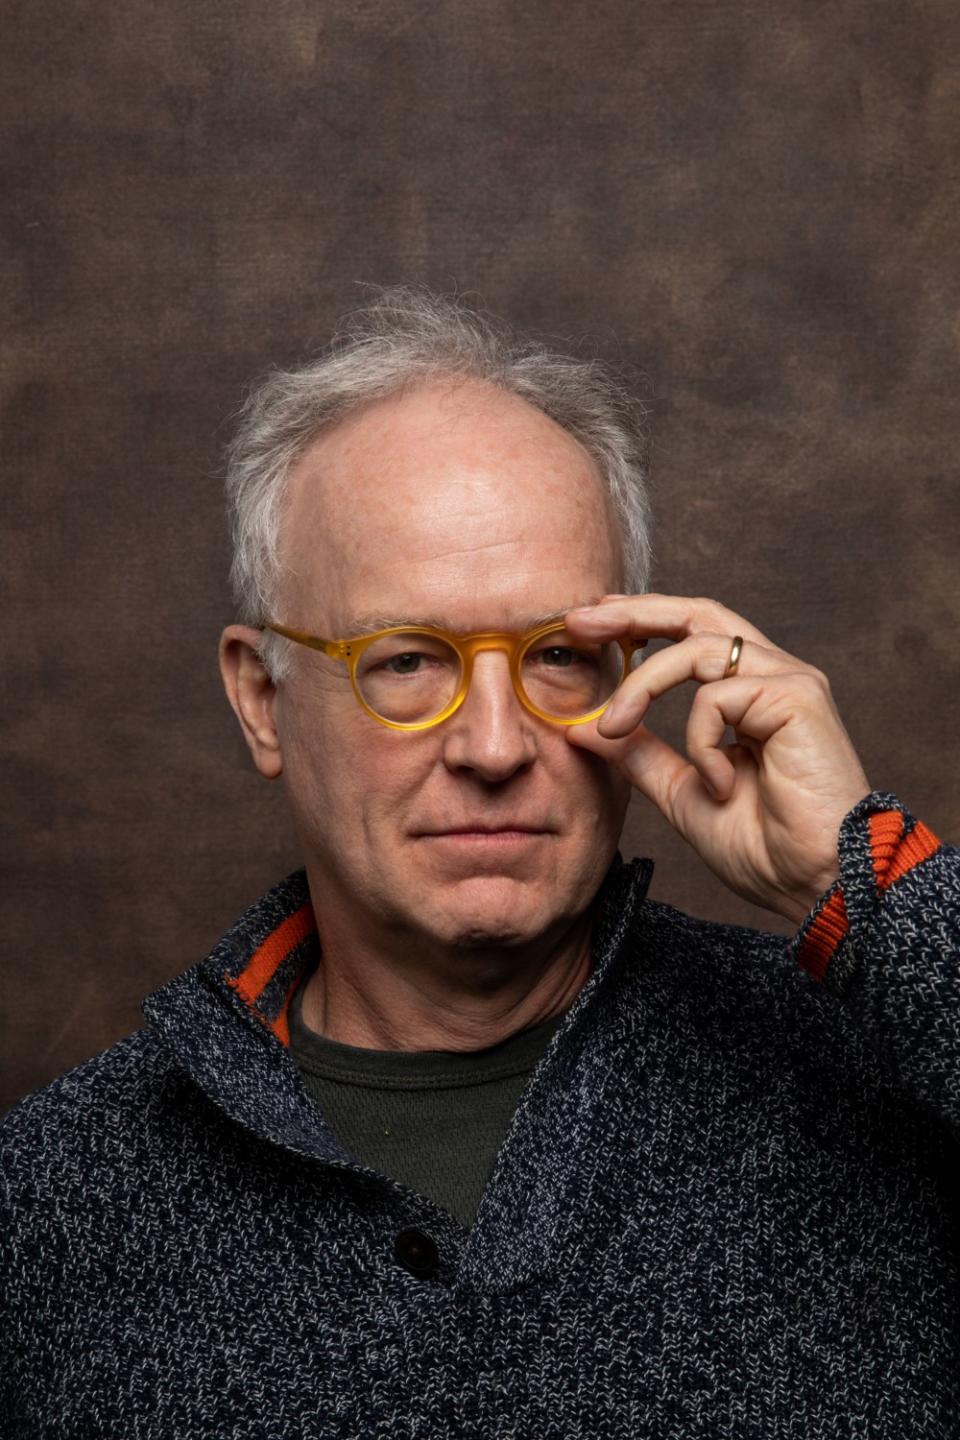 Reed Birney, photographed at the Sundance Film Festival this year.